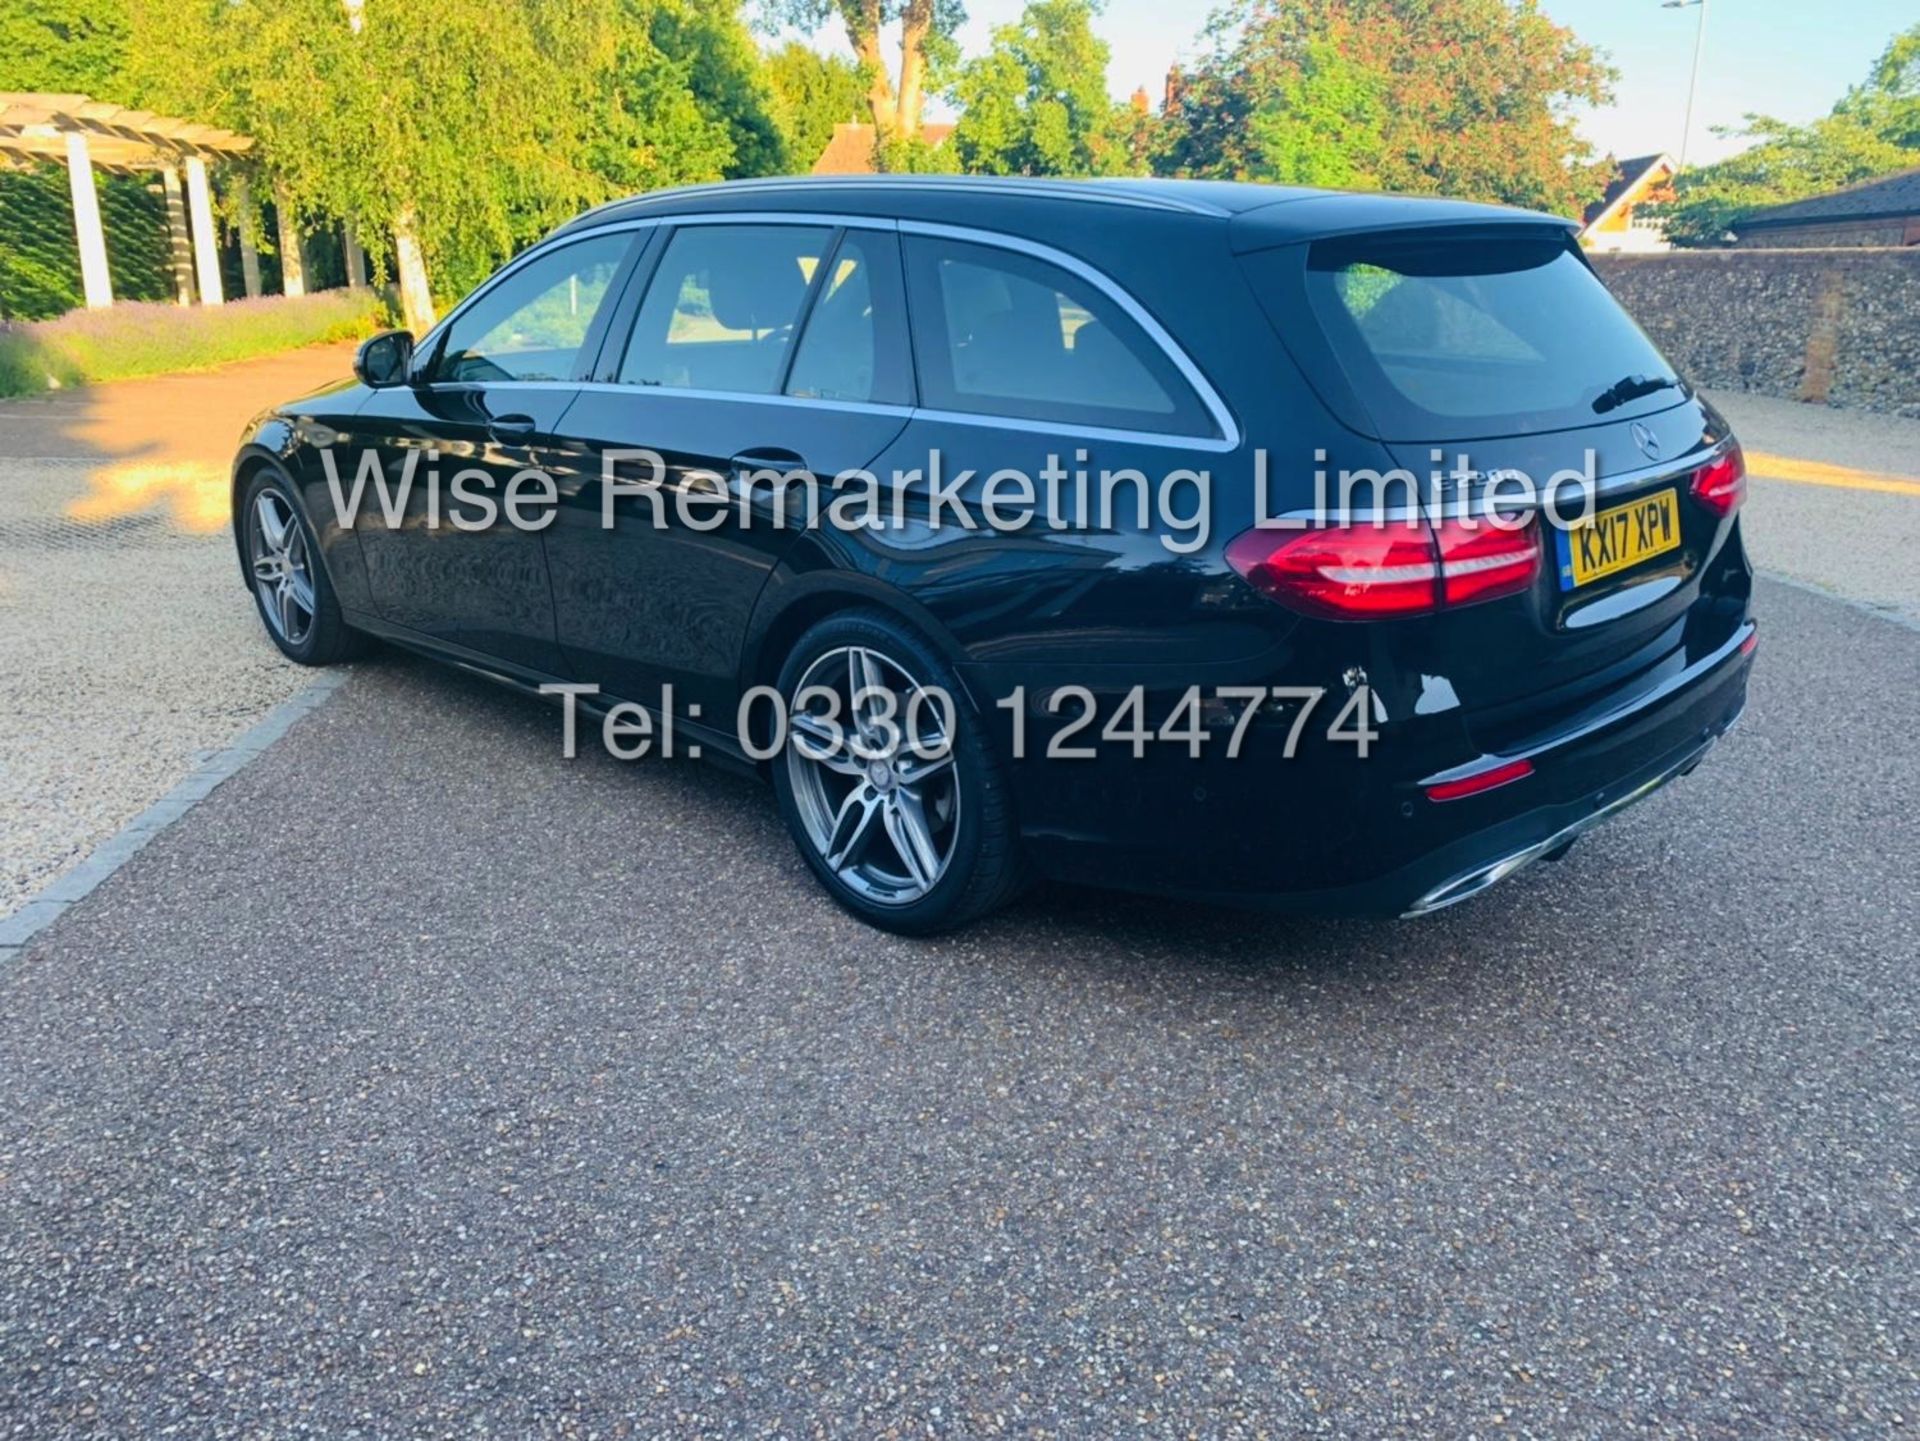 MERCEDES E CLASS ESTATE E220D AMG LINE 2017 / 9G -TRONIC / *LOW MILES* / 1 OWNER - Image 5 of 42